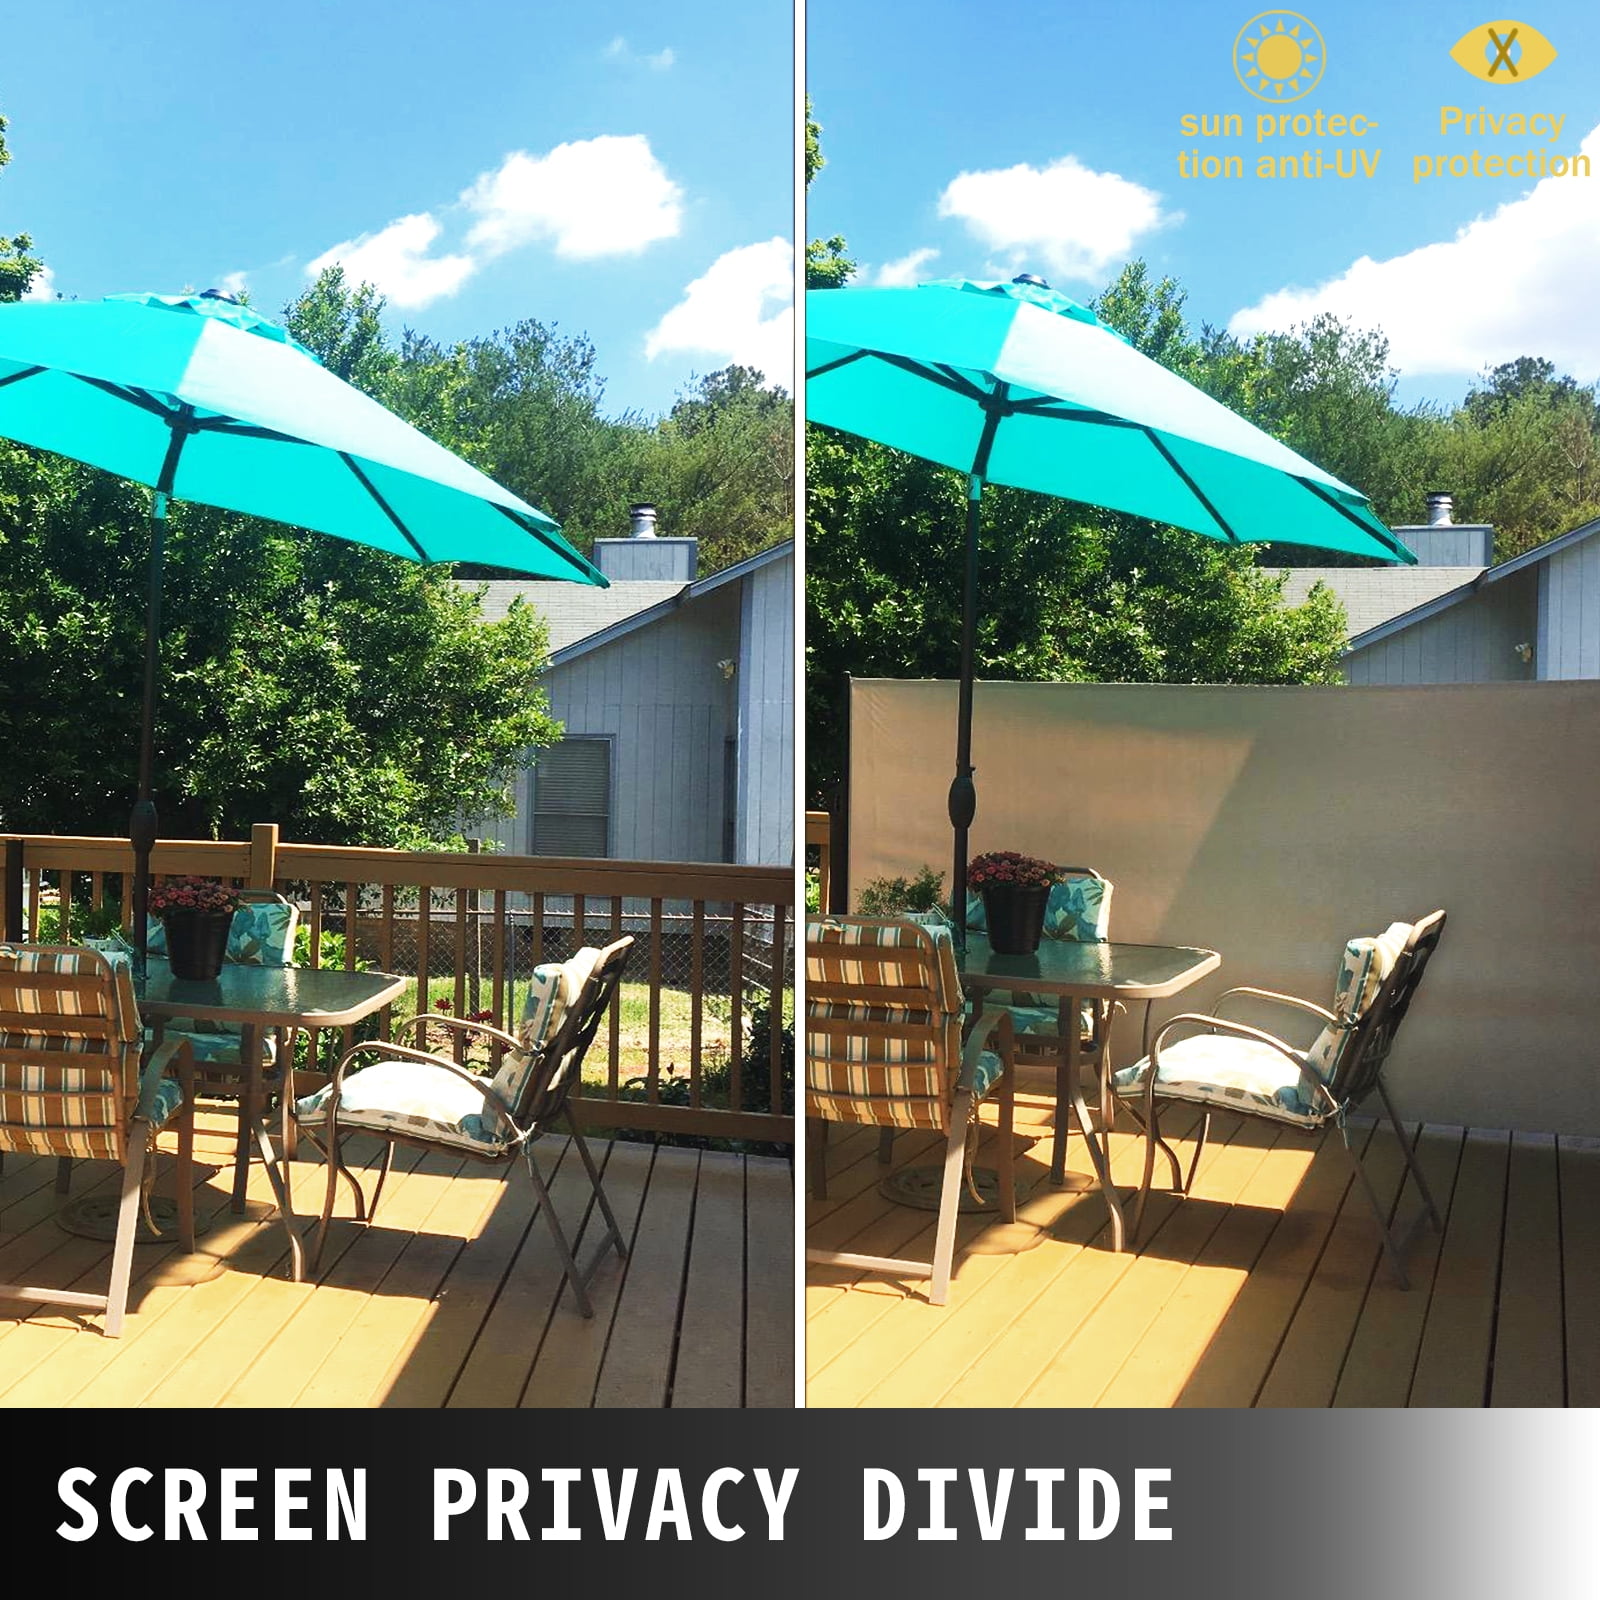 OCDAY Retractable Side Awning 118 x 63 Garden Retractable Patio Screen Waterproof Patio and Terrace Outdoor Retractable Room Divider Brown for Privacy 